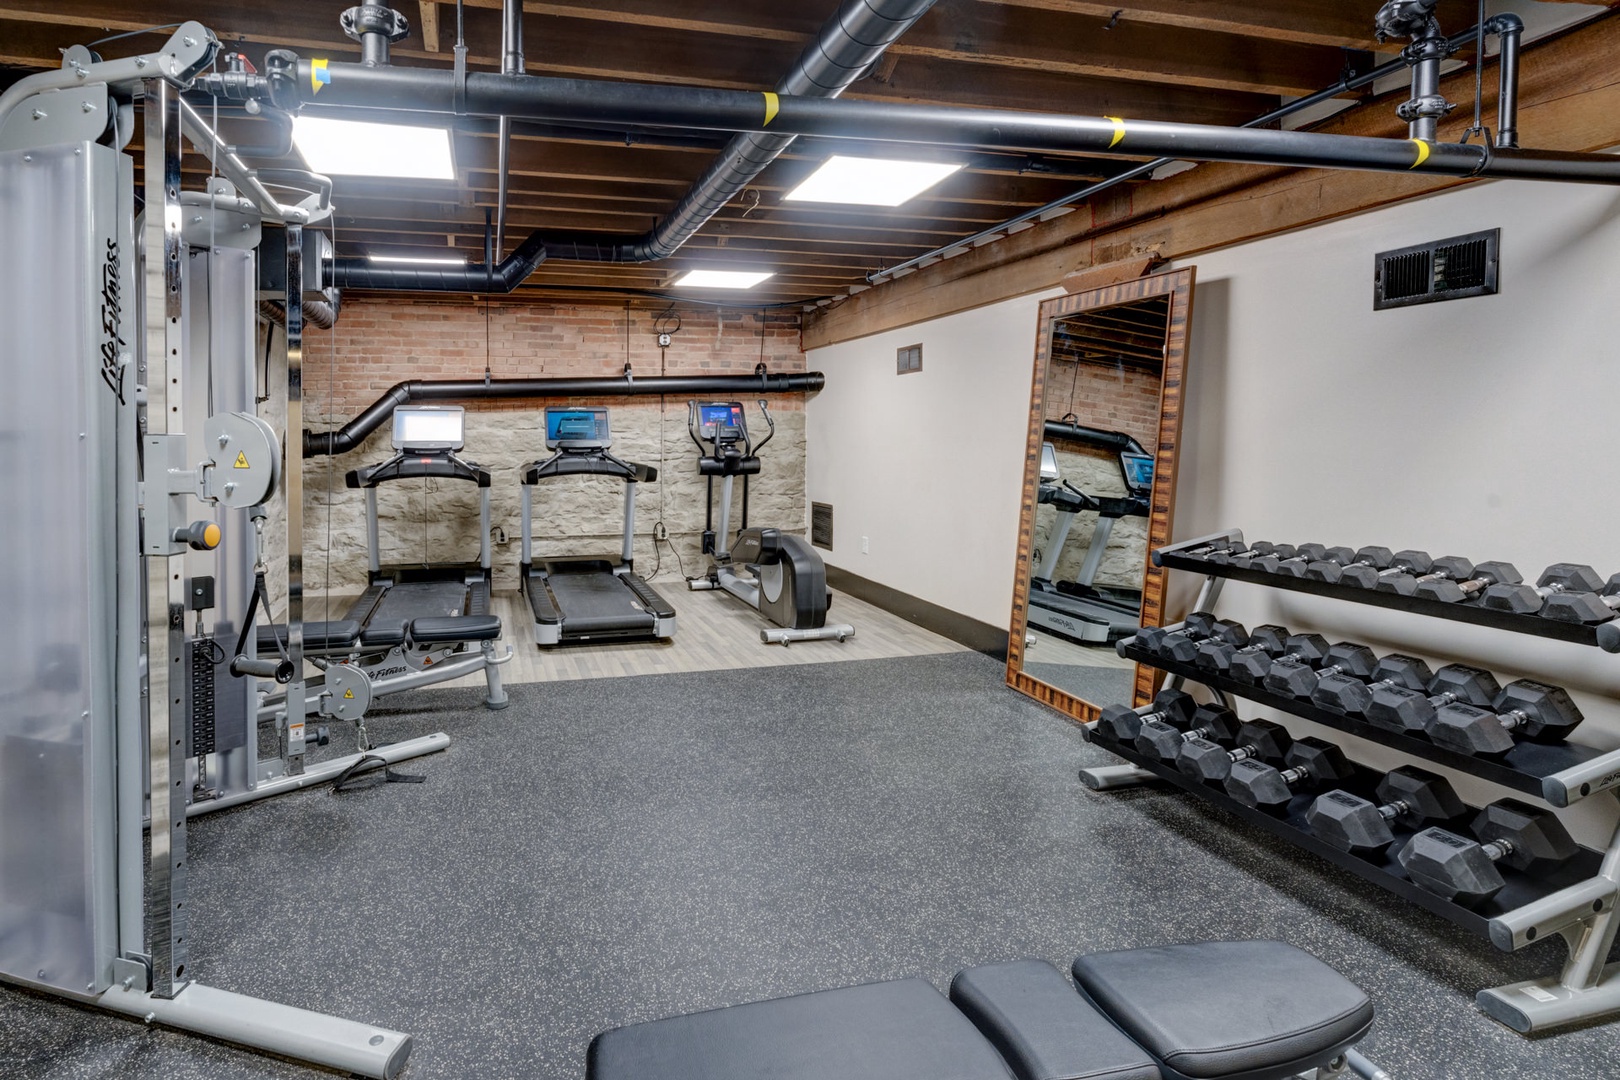 Break a sweat during your stay in The 1865's fitness room